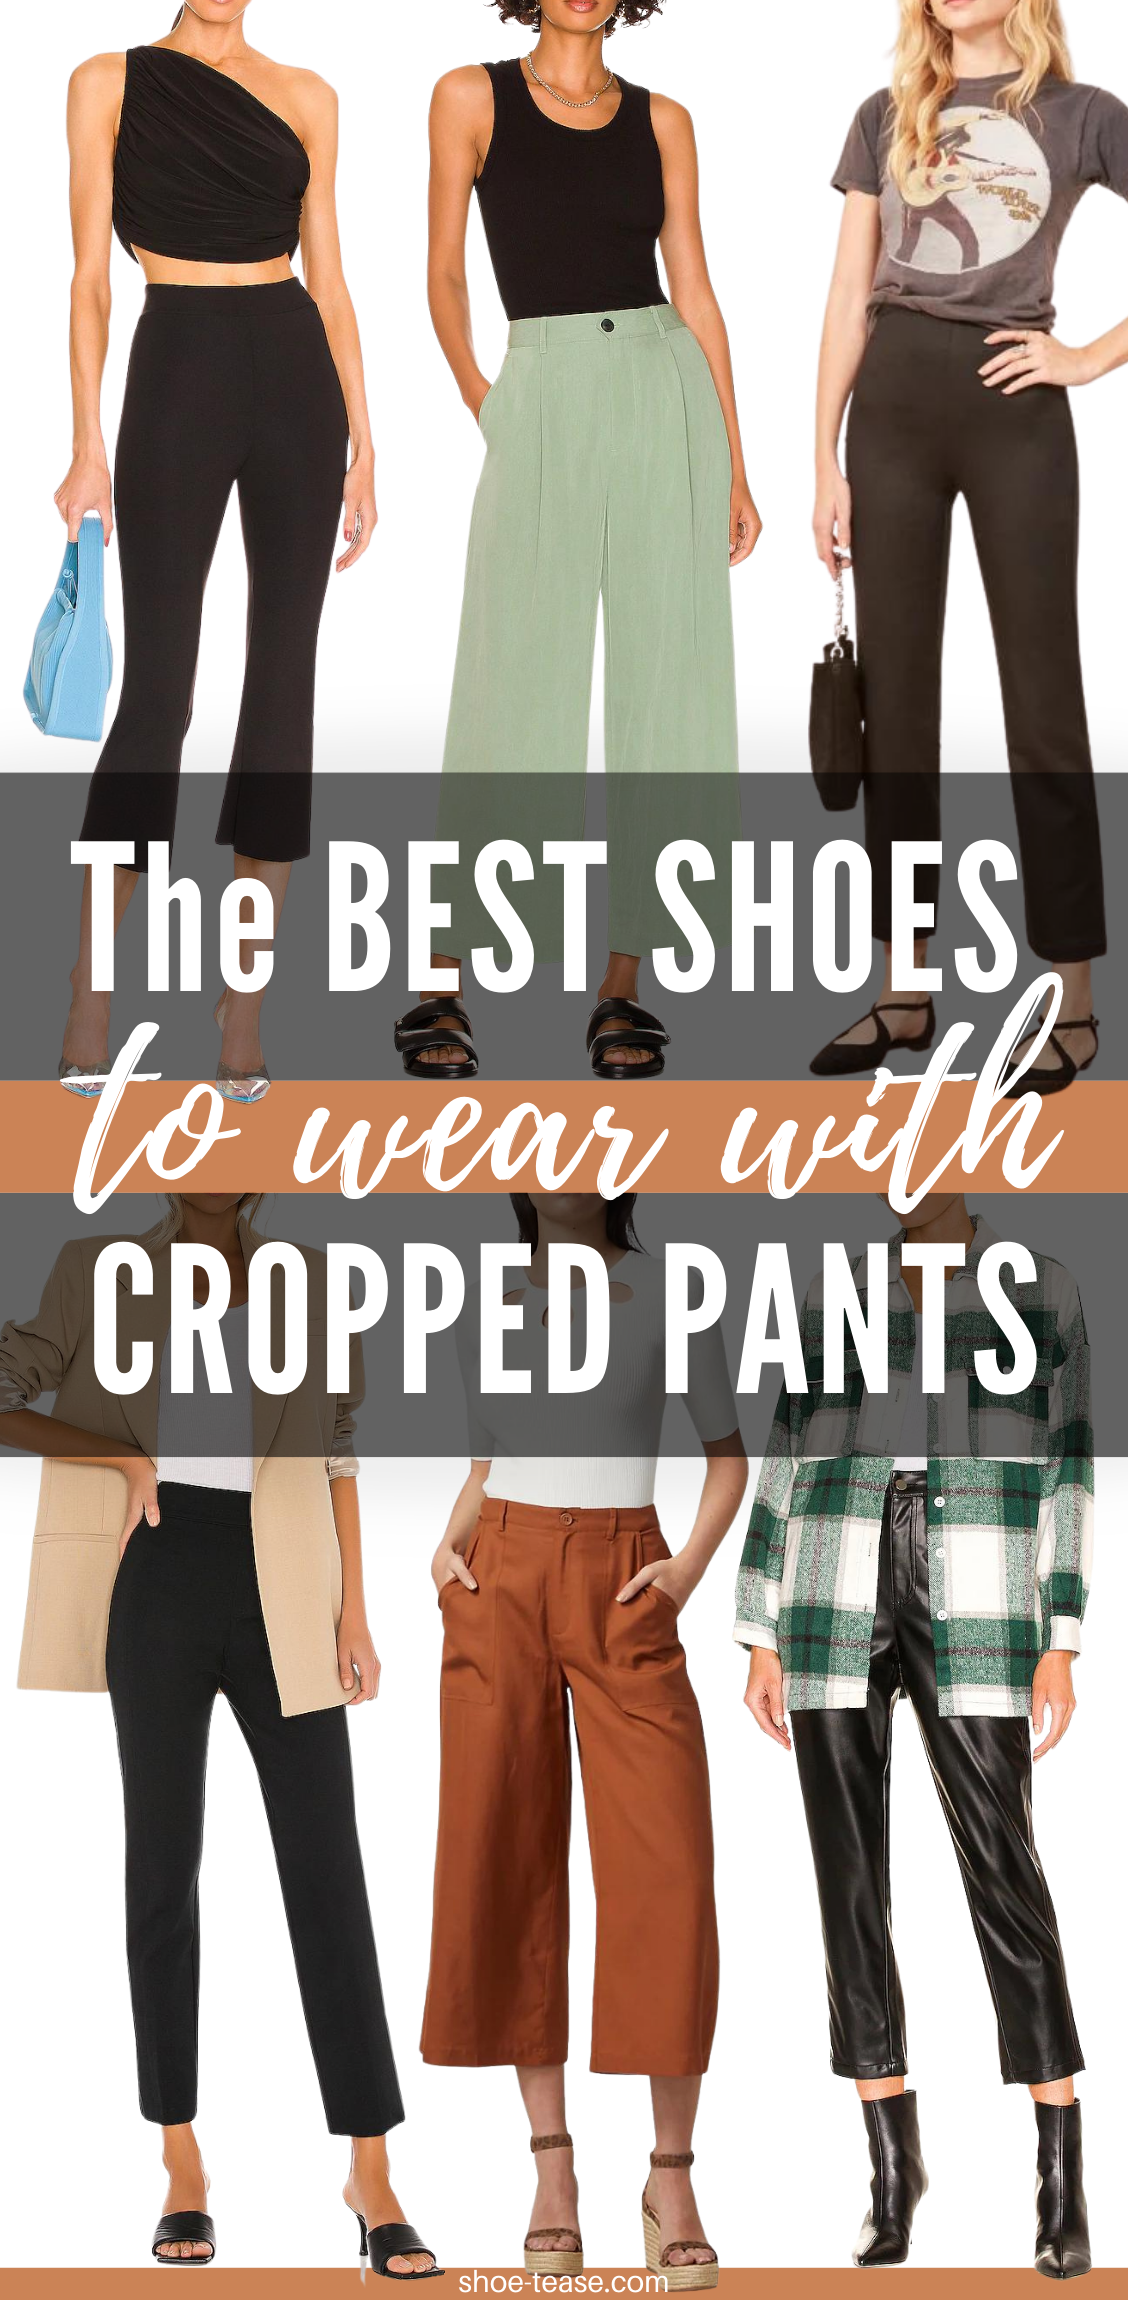 What Shoes to Wear With Cropped Dress Pants Story - ShoeTease Shoe